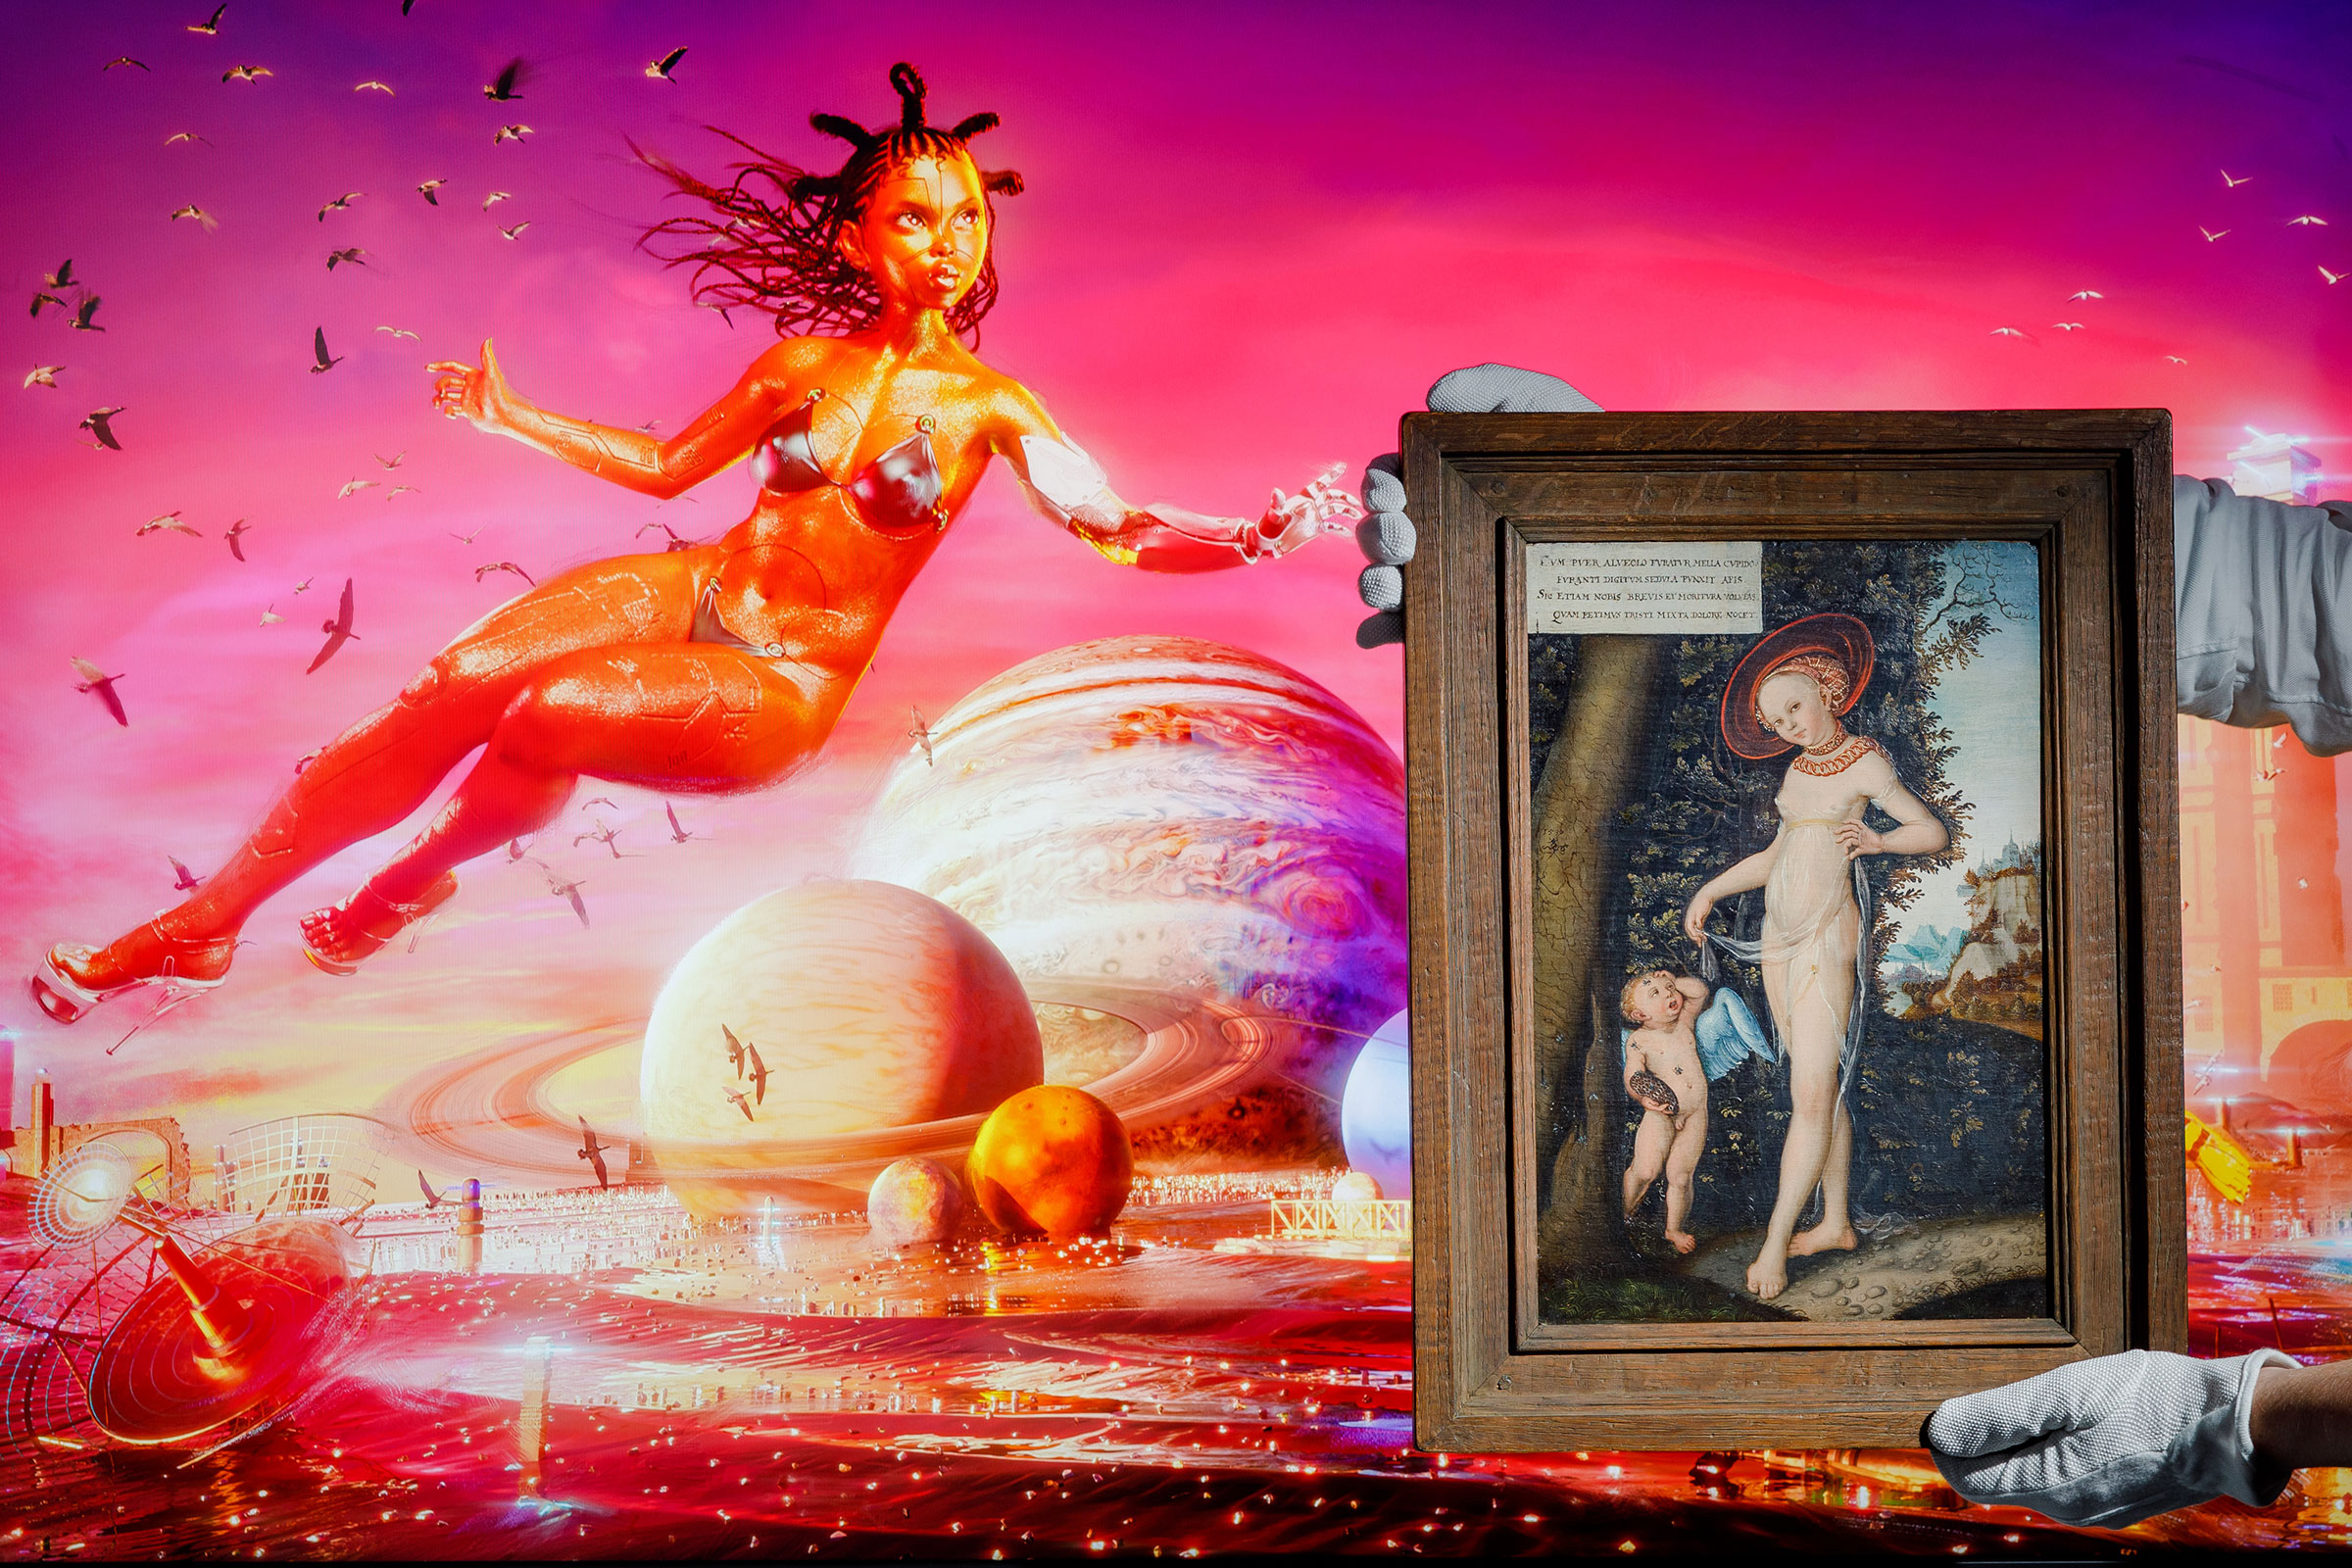 Serwah Attafuah’s [em]Creation of My Metaverse (Between this World and the Next)[/em] alongside [em]Venus with Cupid stealing honey, by a follower of Lucas Cranach the Elder,[/em] early 17th Century at Sotheby's on June 4, 2021 in London. (Tristan Fewings—Sotheby's/Getty Images)